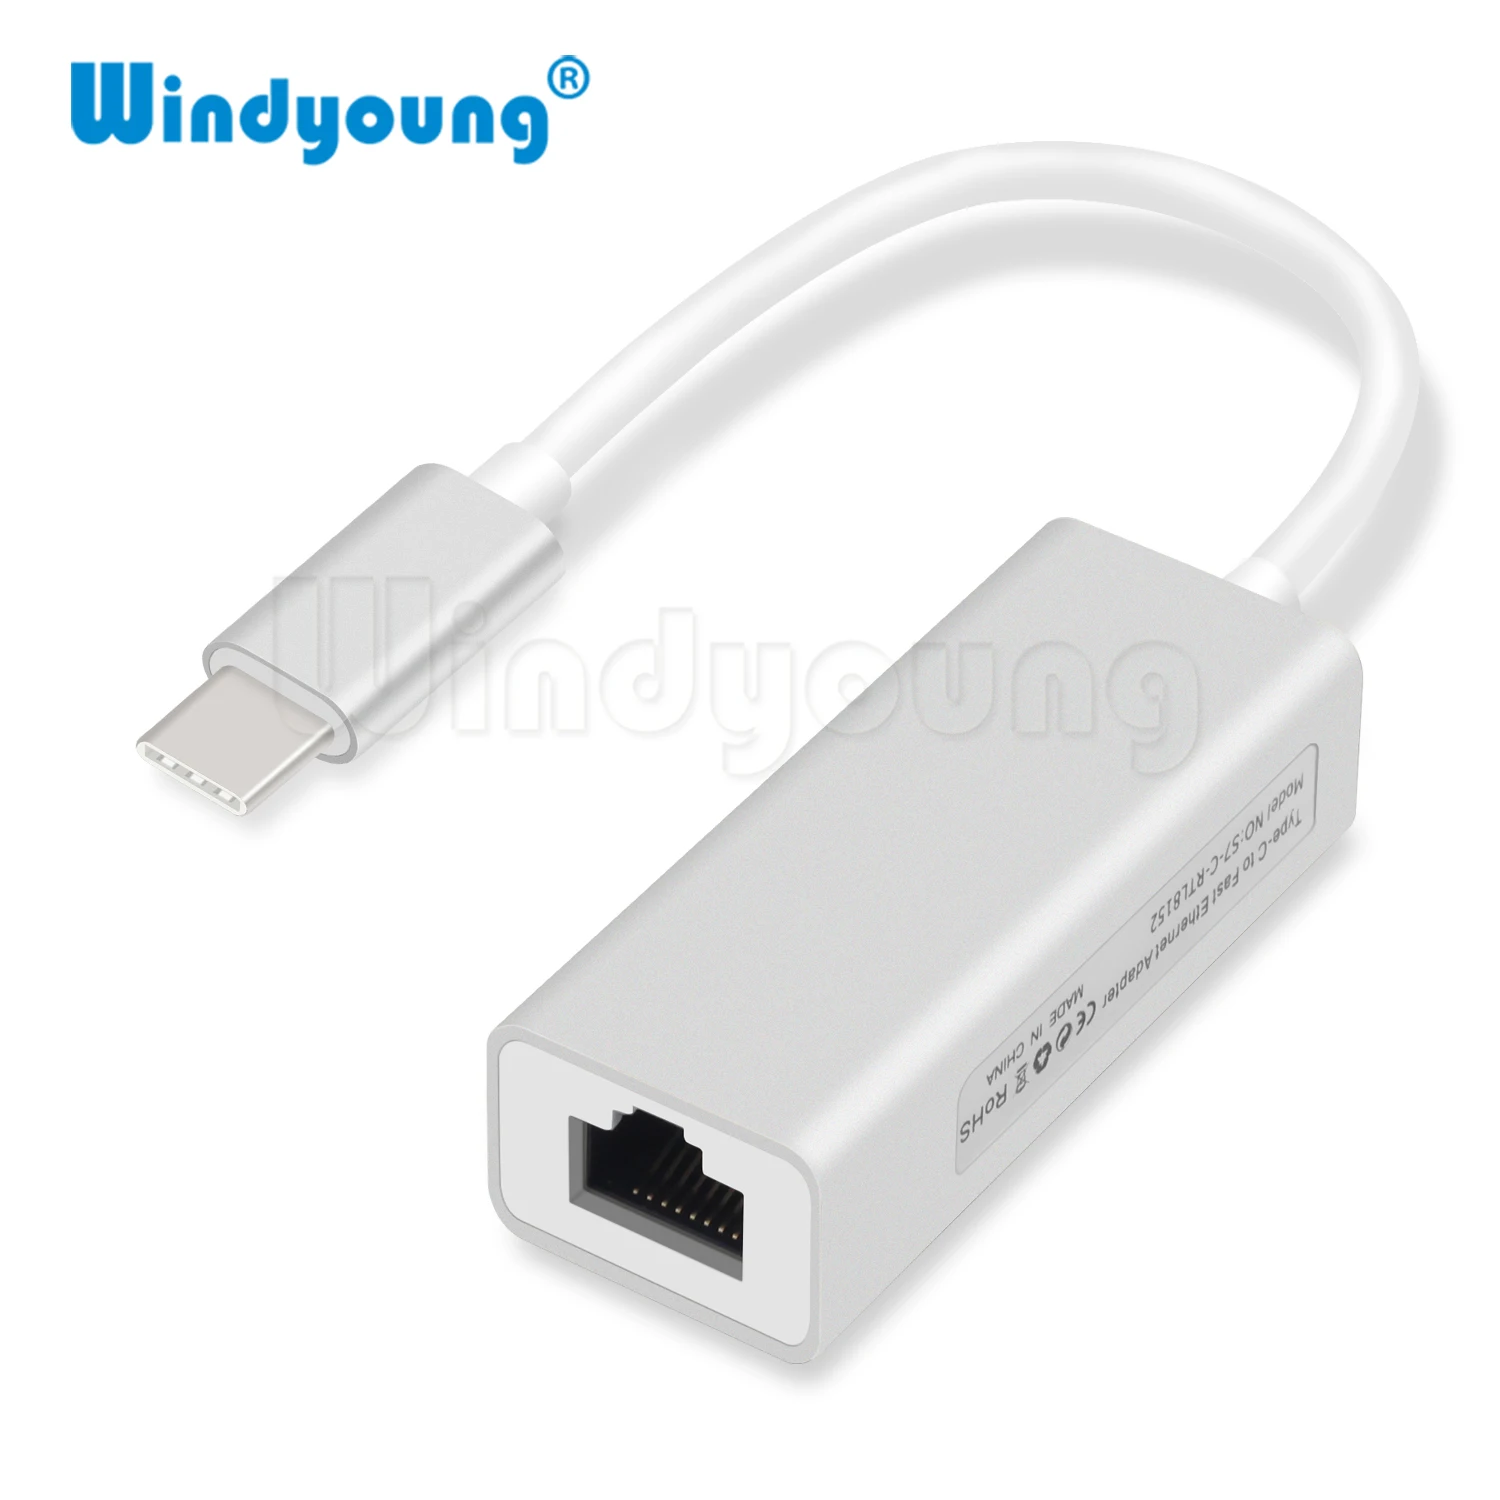 Ladron Ethernet Ñ - Pc Hardware Cables & Adapters - AliExpress